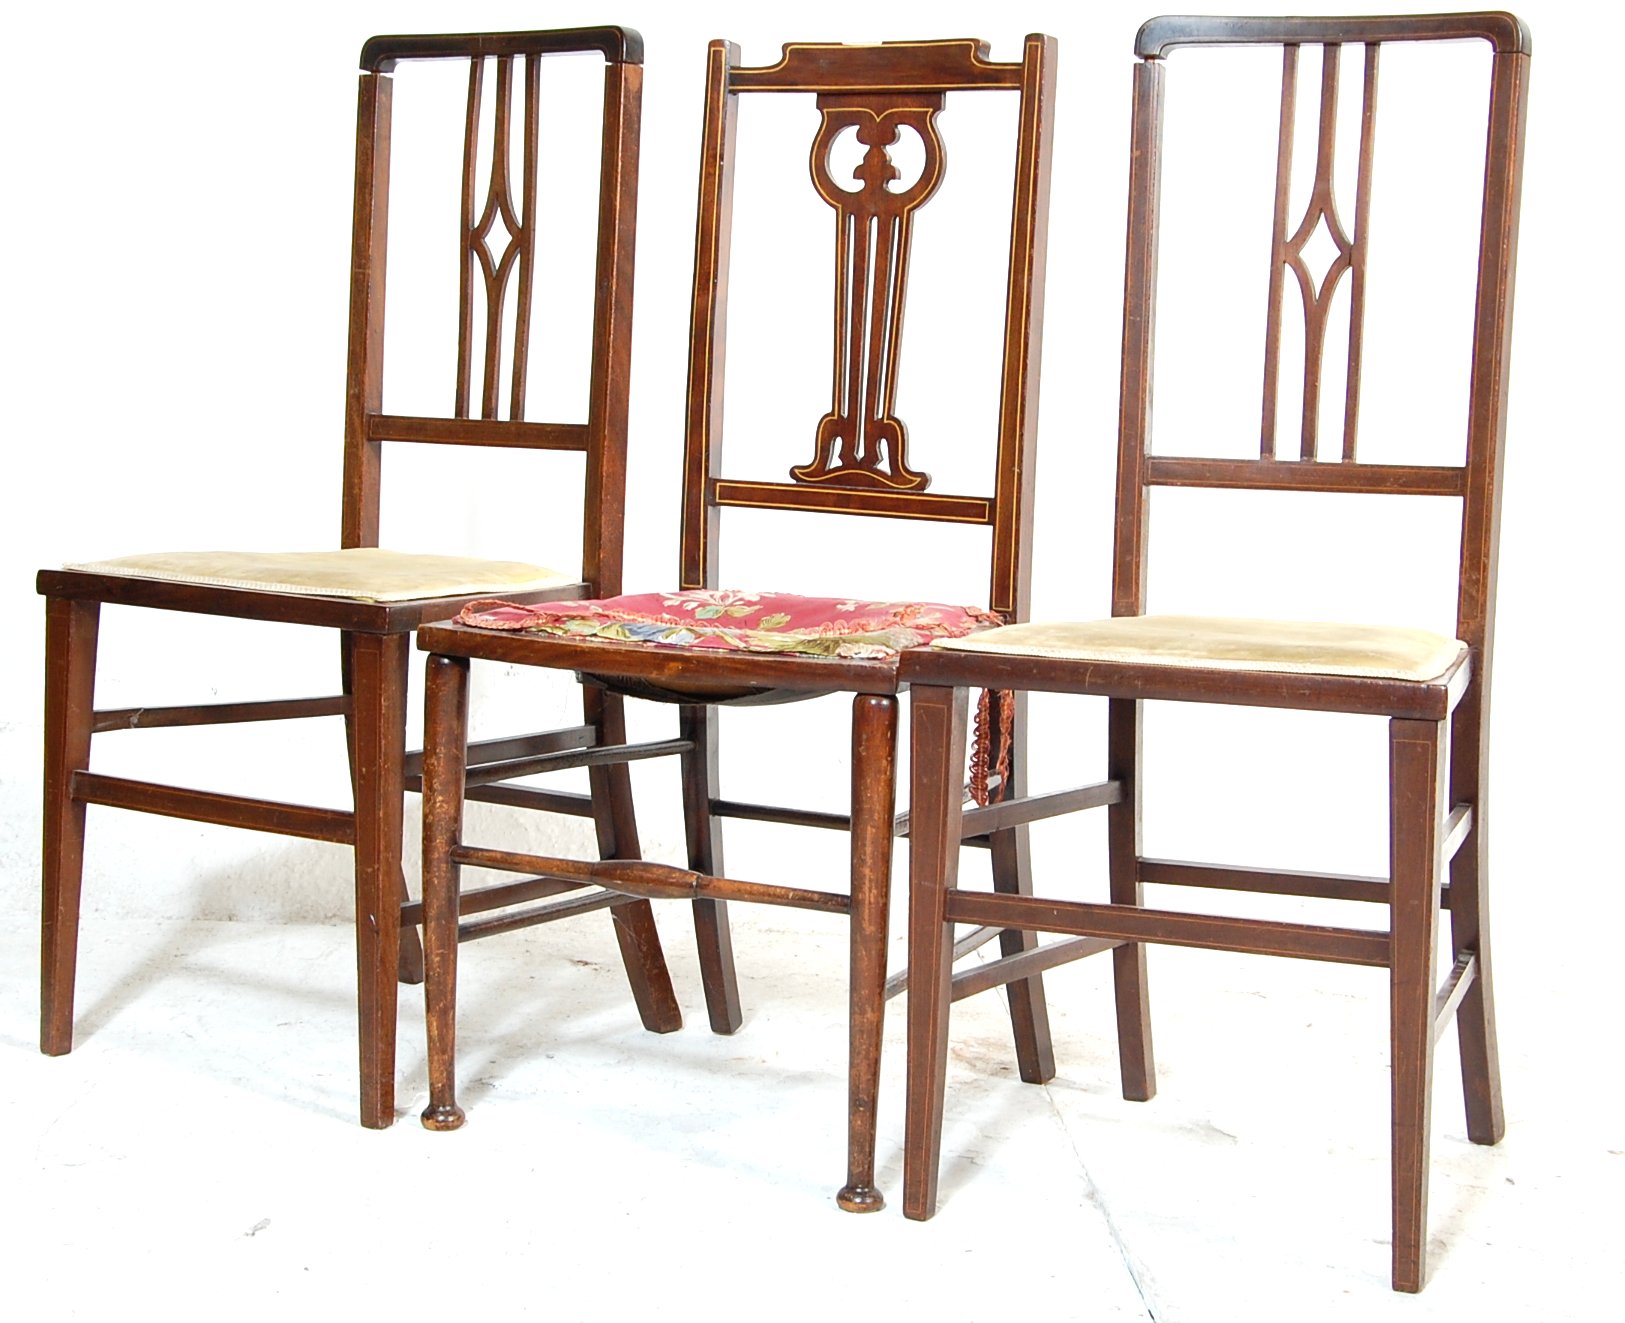 THREE EARLY 20TH CENTURY EDWARDIAN BEDROOM CHAIRS.